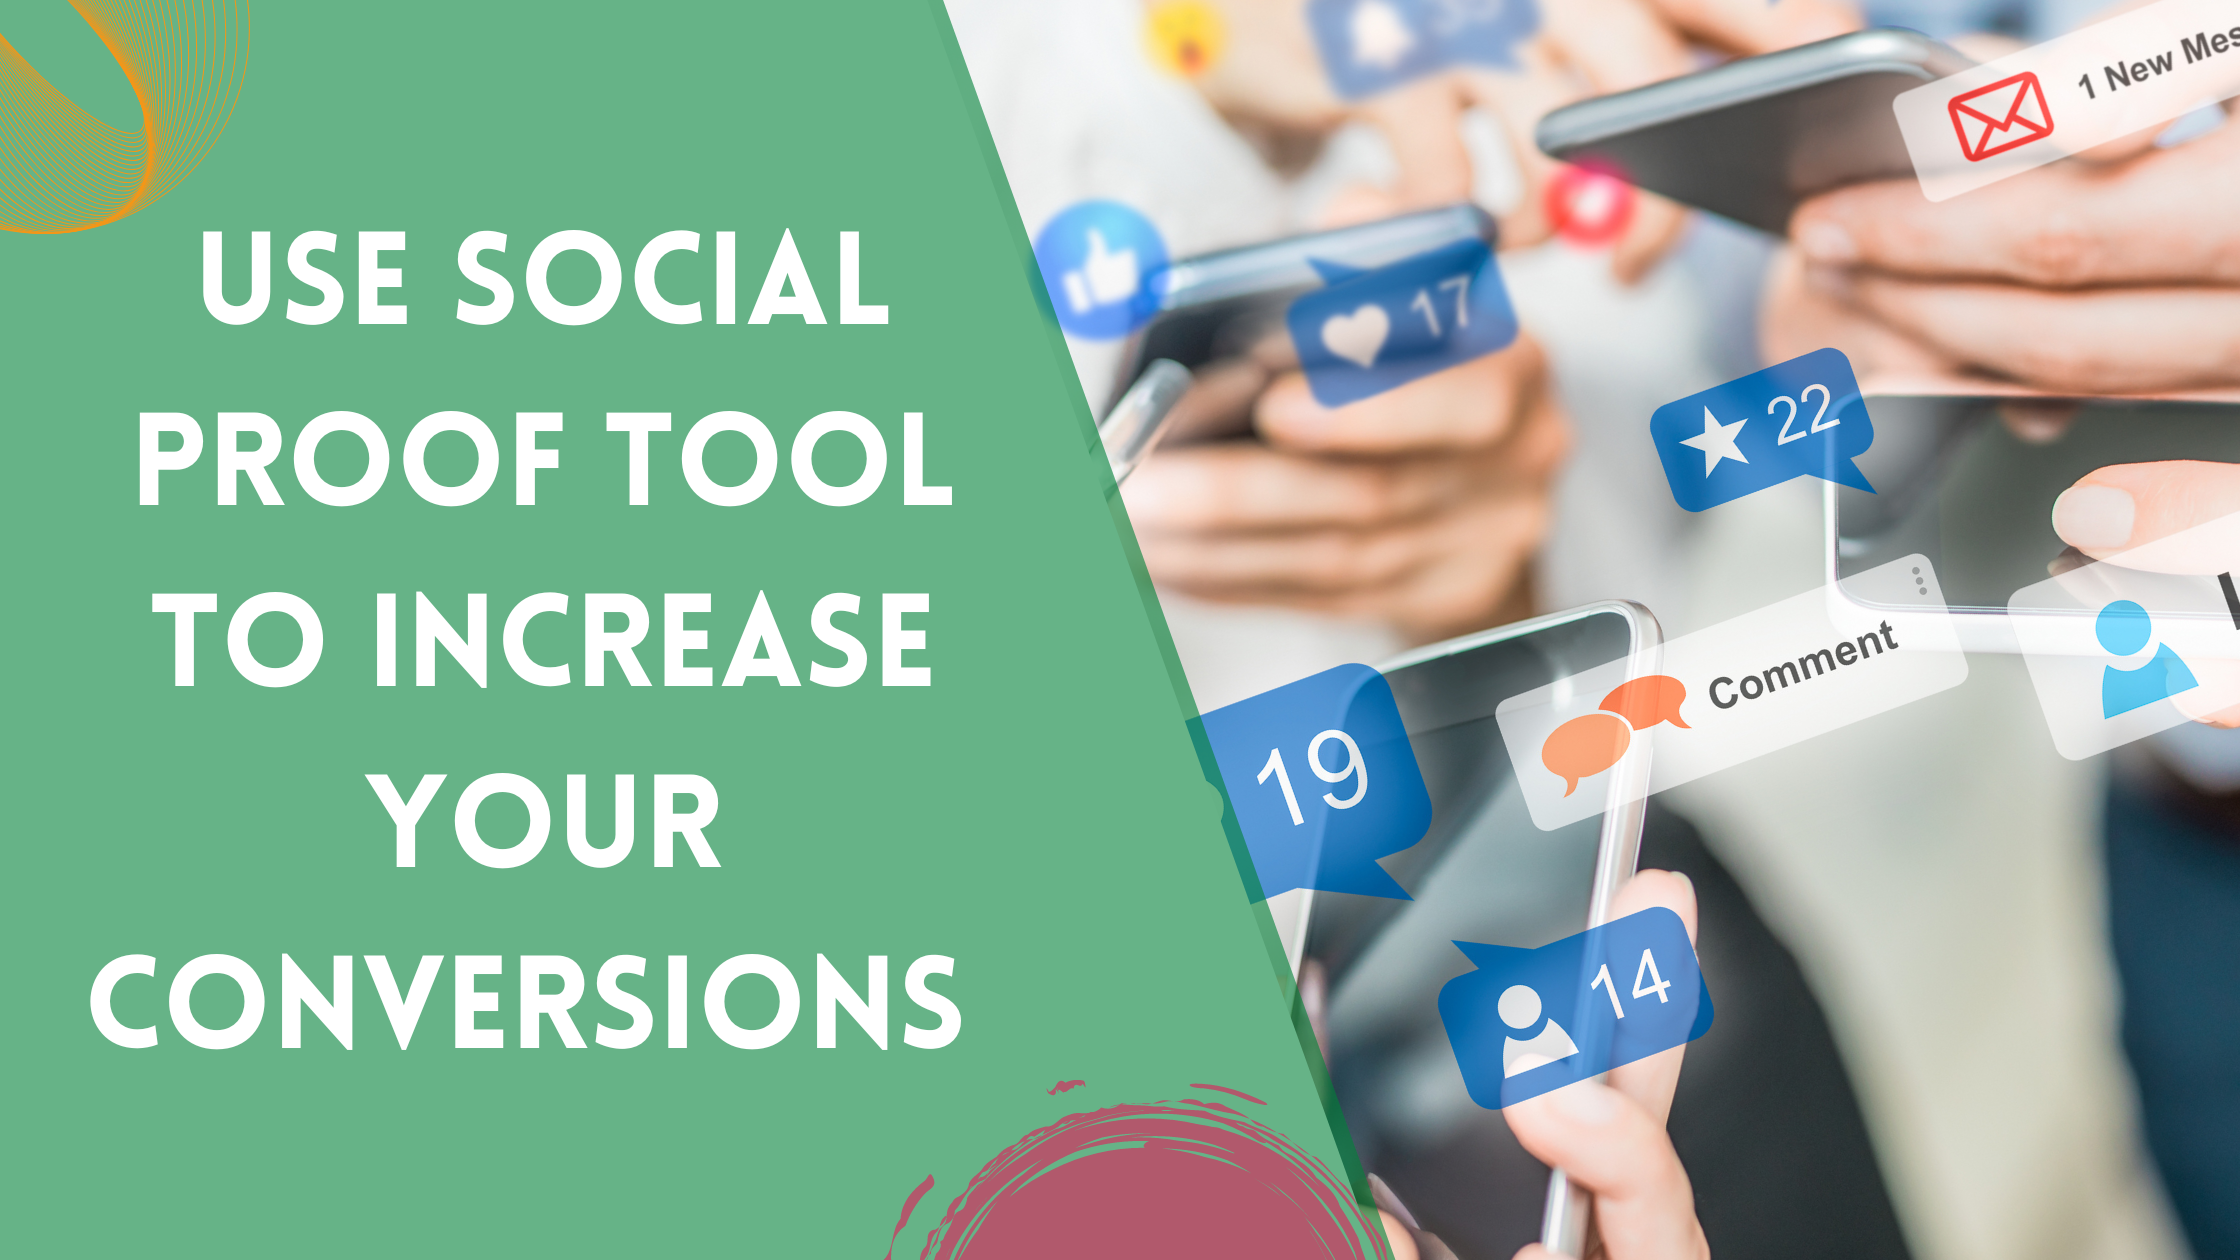 5 Proven Ways to Use Social Proof tool to Increase Your Conversions